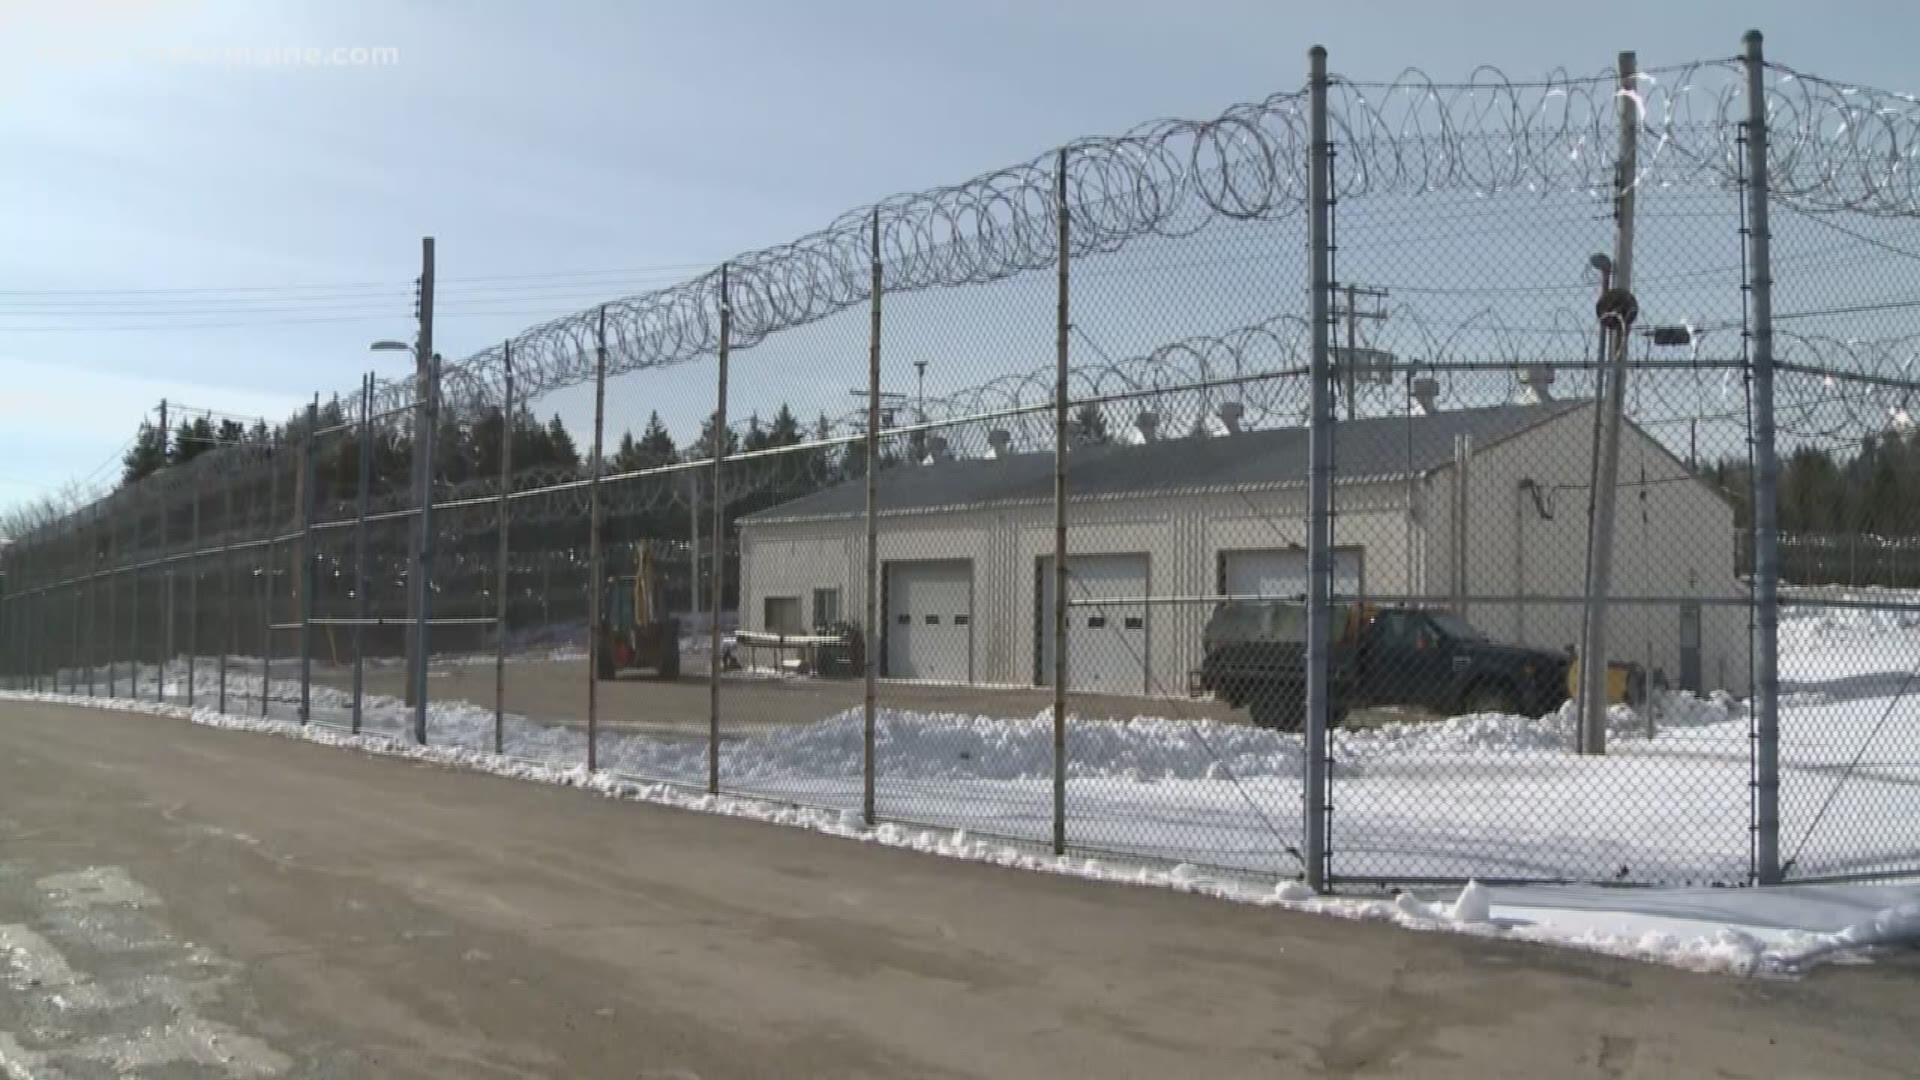 The state is getting closer to reopening a prison in Washington County, but the exact location has not yet been decided.